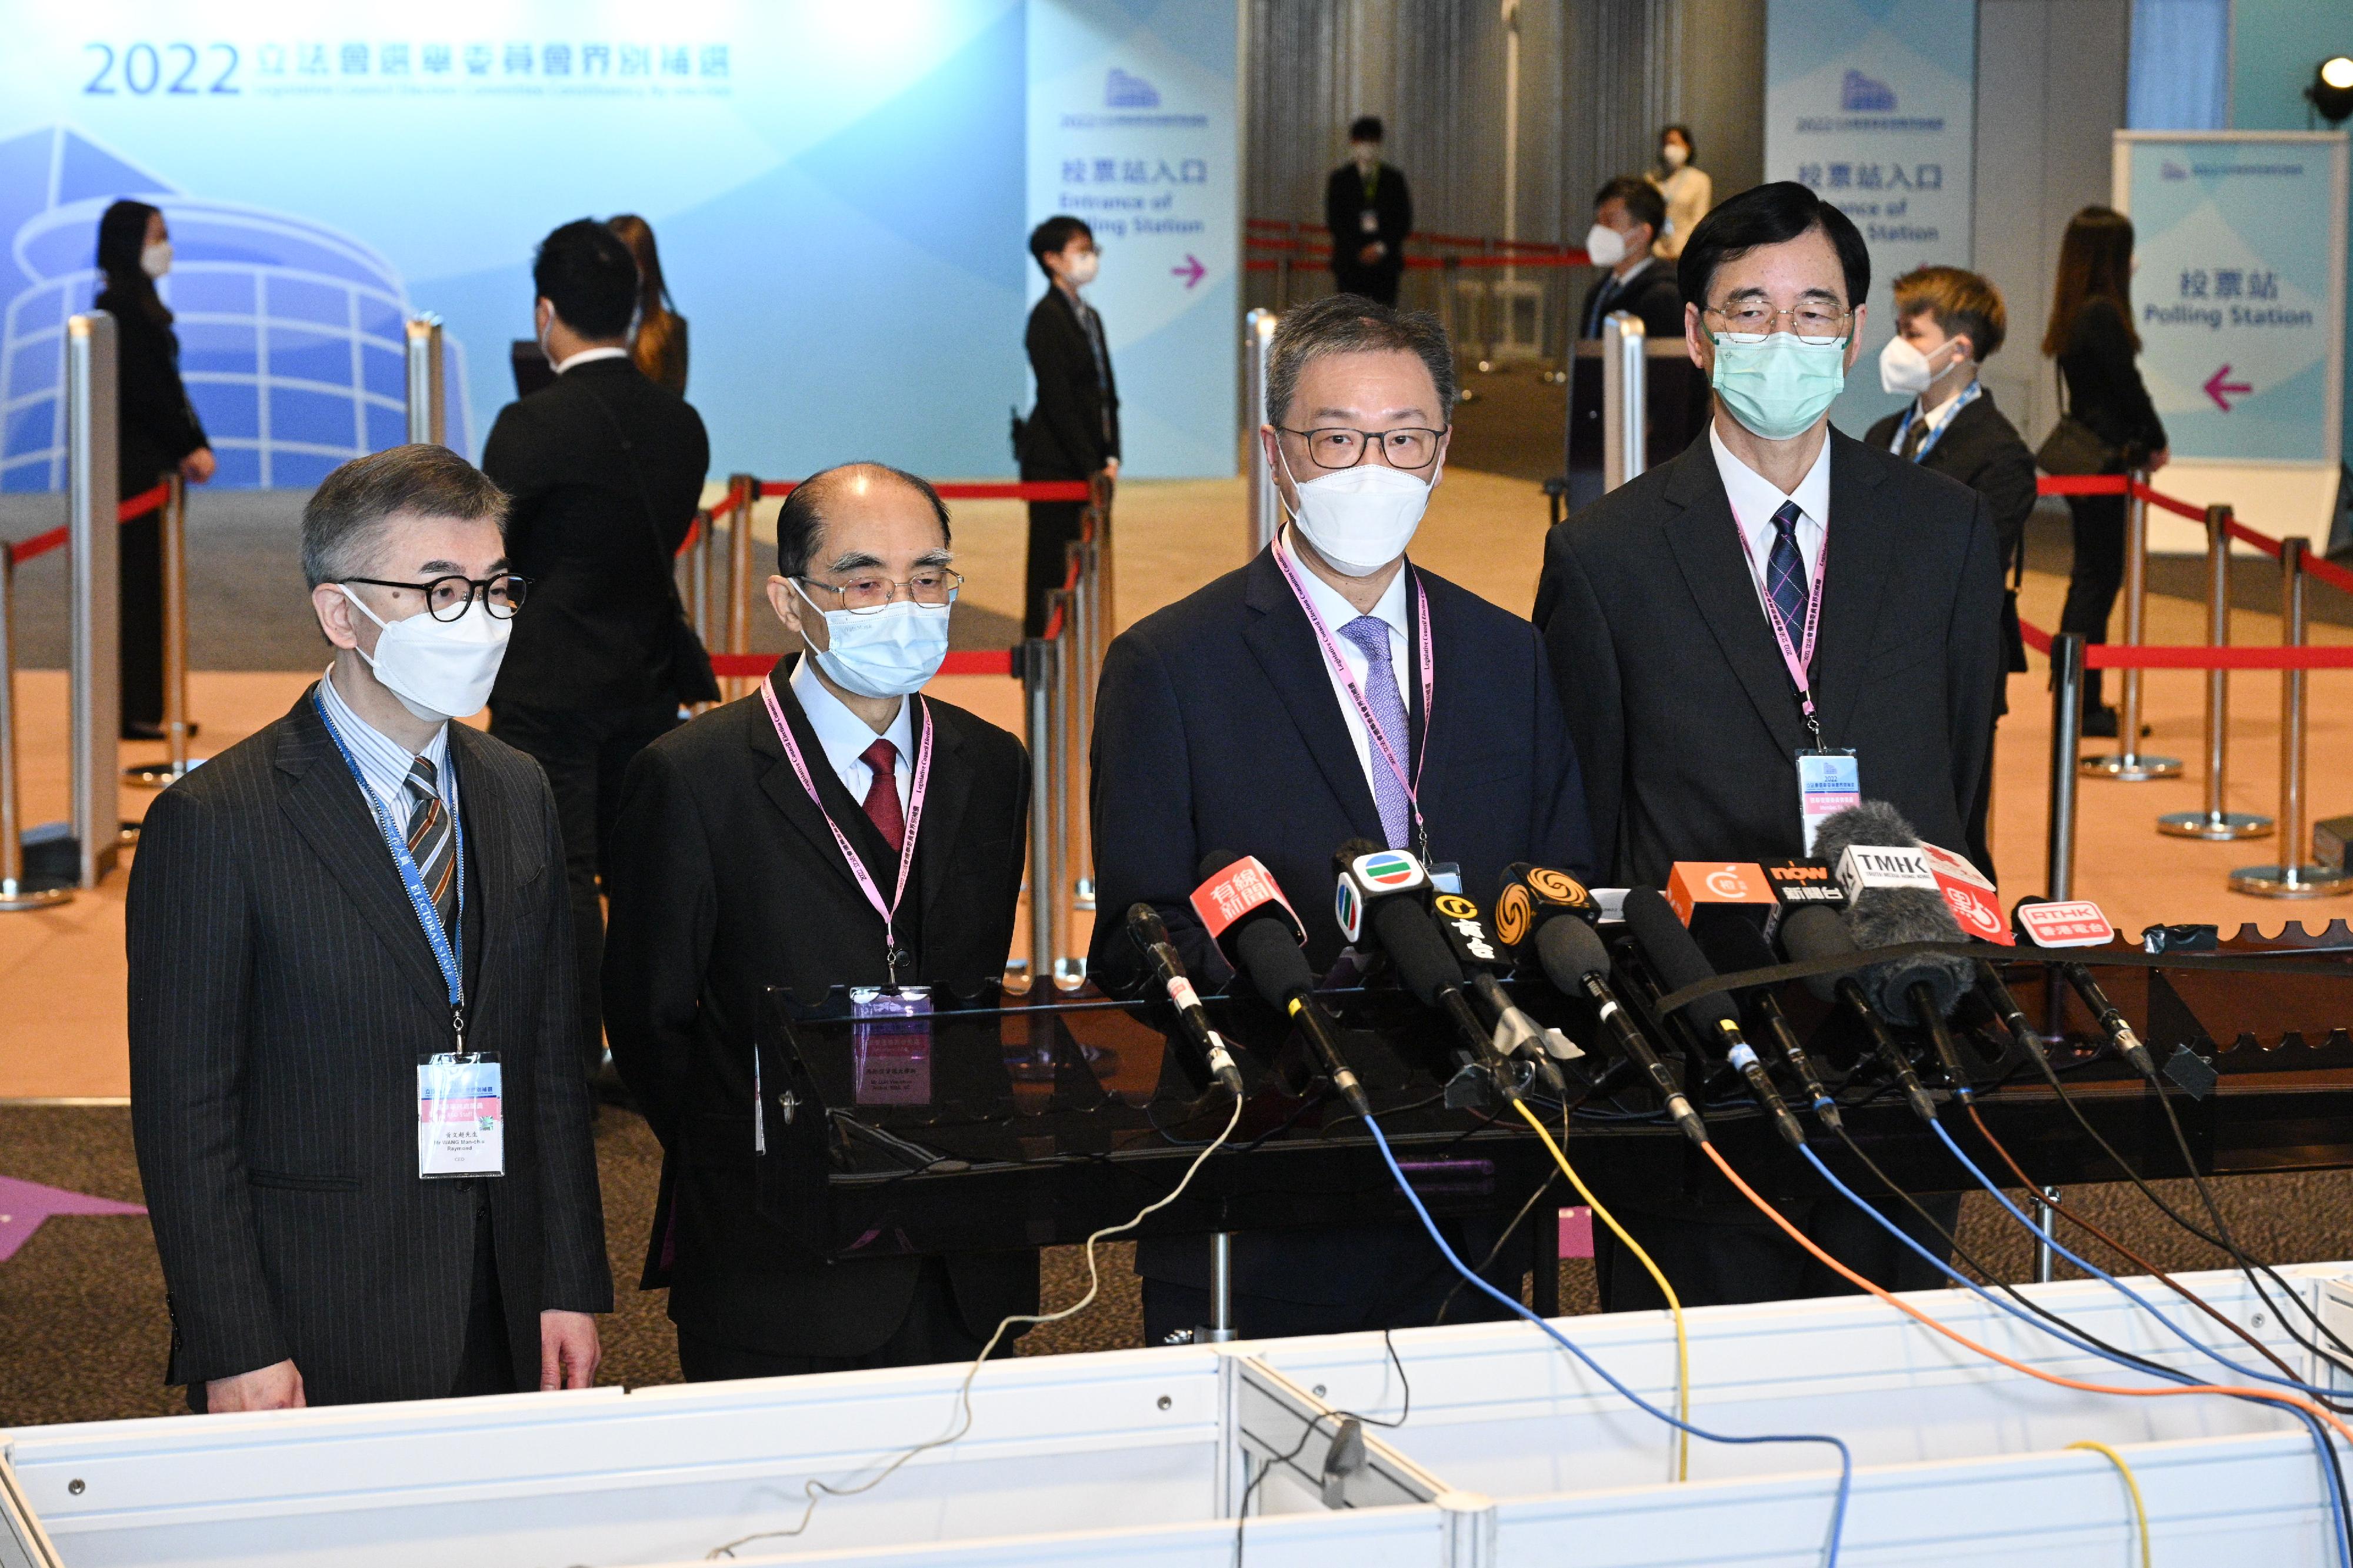 The Chairman of the Electoral Affairs Commission (EAC), Mr Justice David Lok (second right), EAC members Mr Arthur Luk, SC (second left), and Professor Daniel Shek (first right) met the media after their visit to the central counting station and polling station of the 2022 Legislative Council Election Committee constituency by-election at the Hong Kong Convention and Exhibition Centre this morning (December 18). Also present was the Chief Electoral Officer of the Registration and Electoral Office, Mr Raymond Wang (first left).